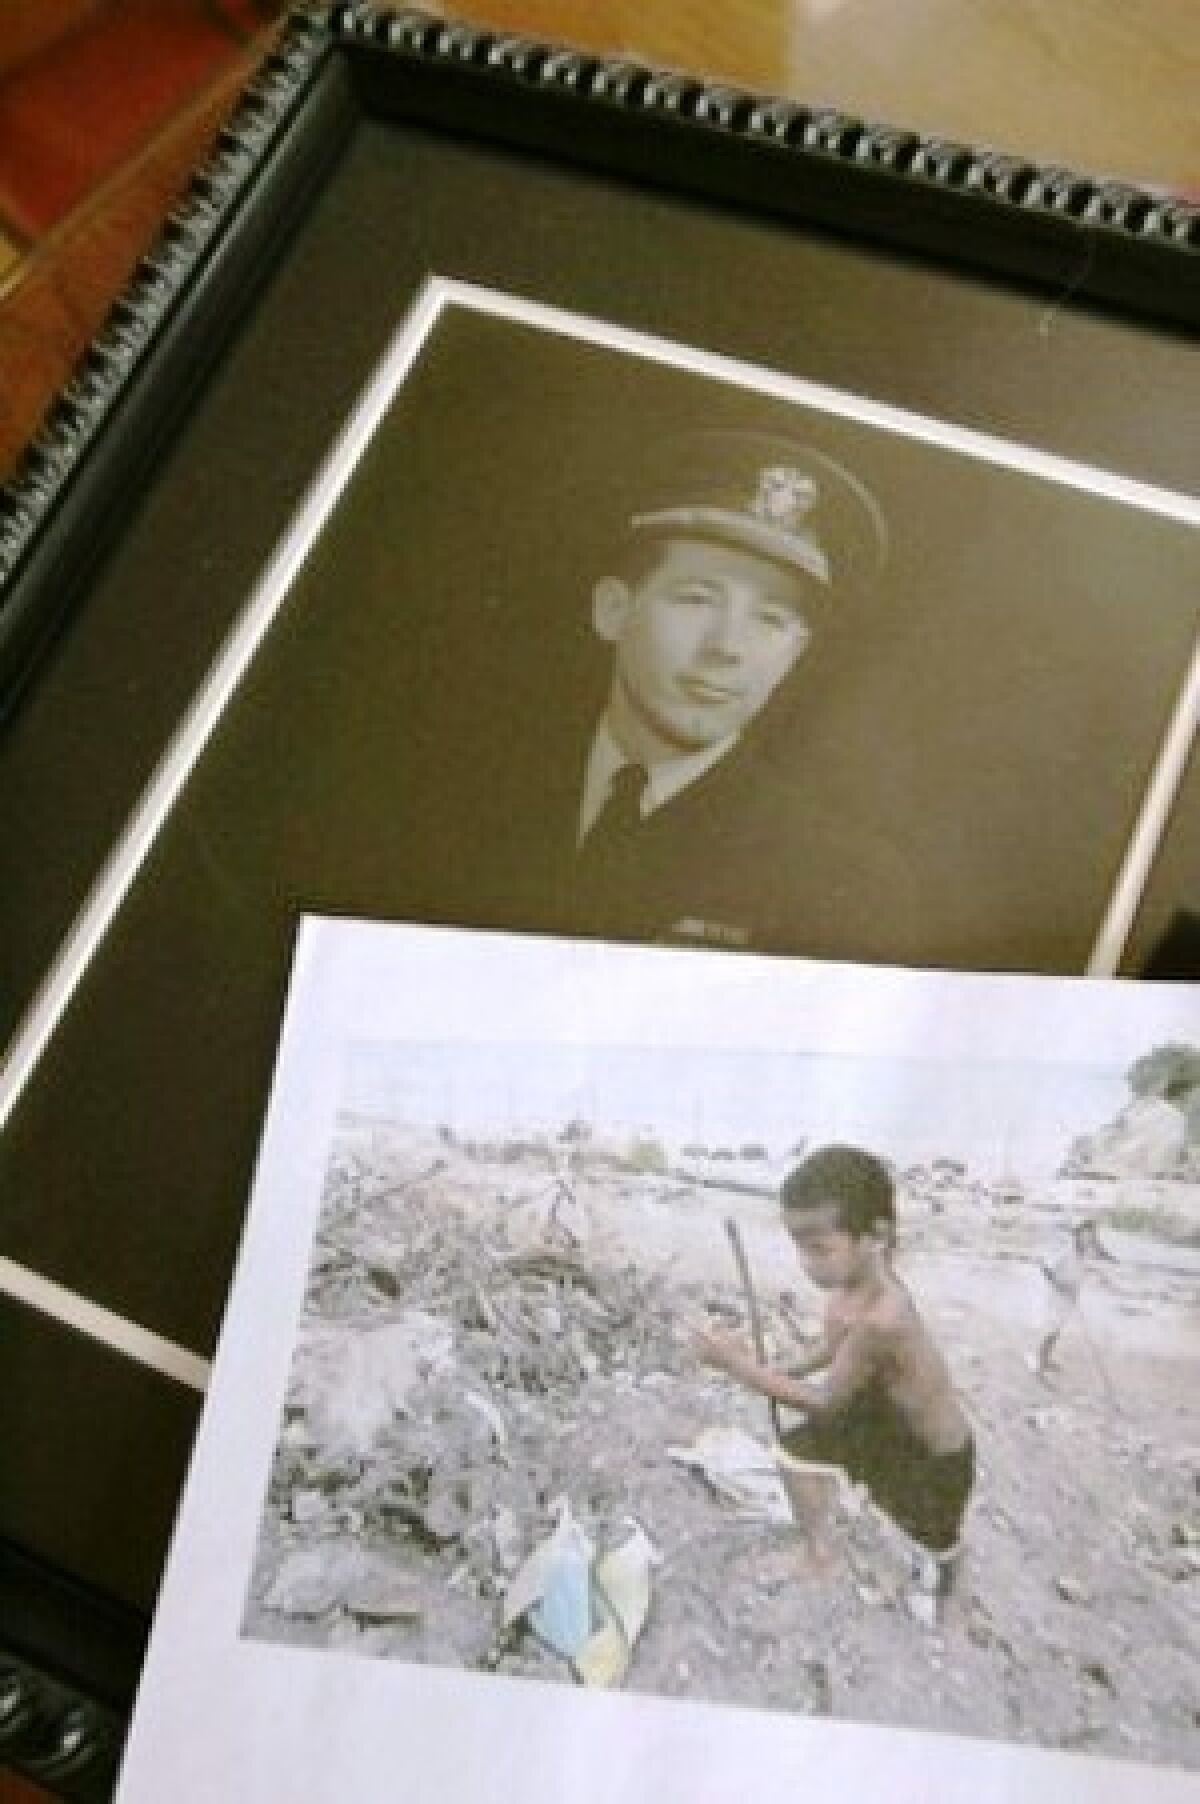 Photos show Leon Cooper in his Navy uniform and a child playing in the trash on Tarawa.